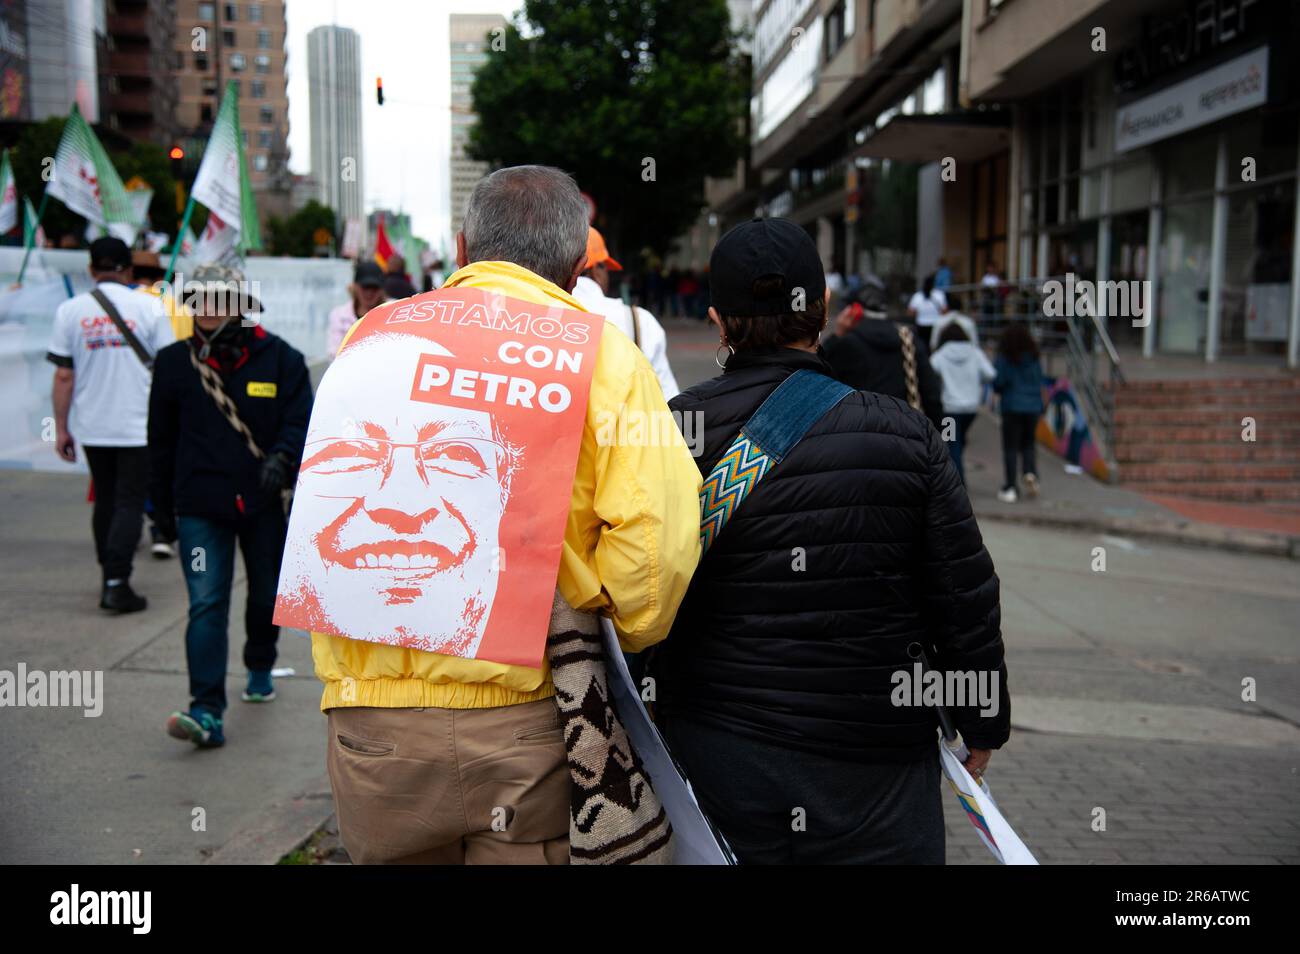 Supporters hold signs in support of Colombian president Gustavo Petro during the demonstrations in support of the Colombian government social reforms, Stock Photo